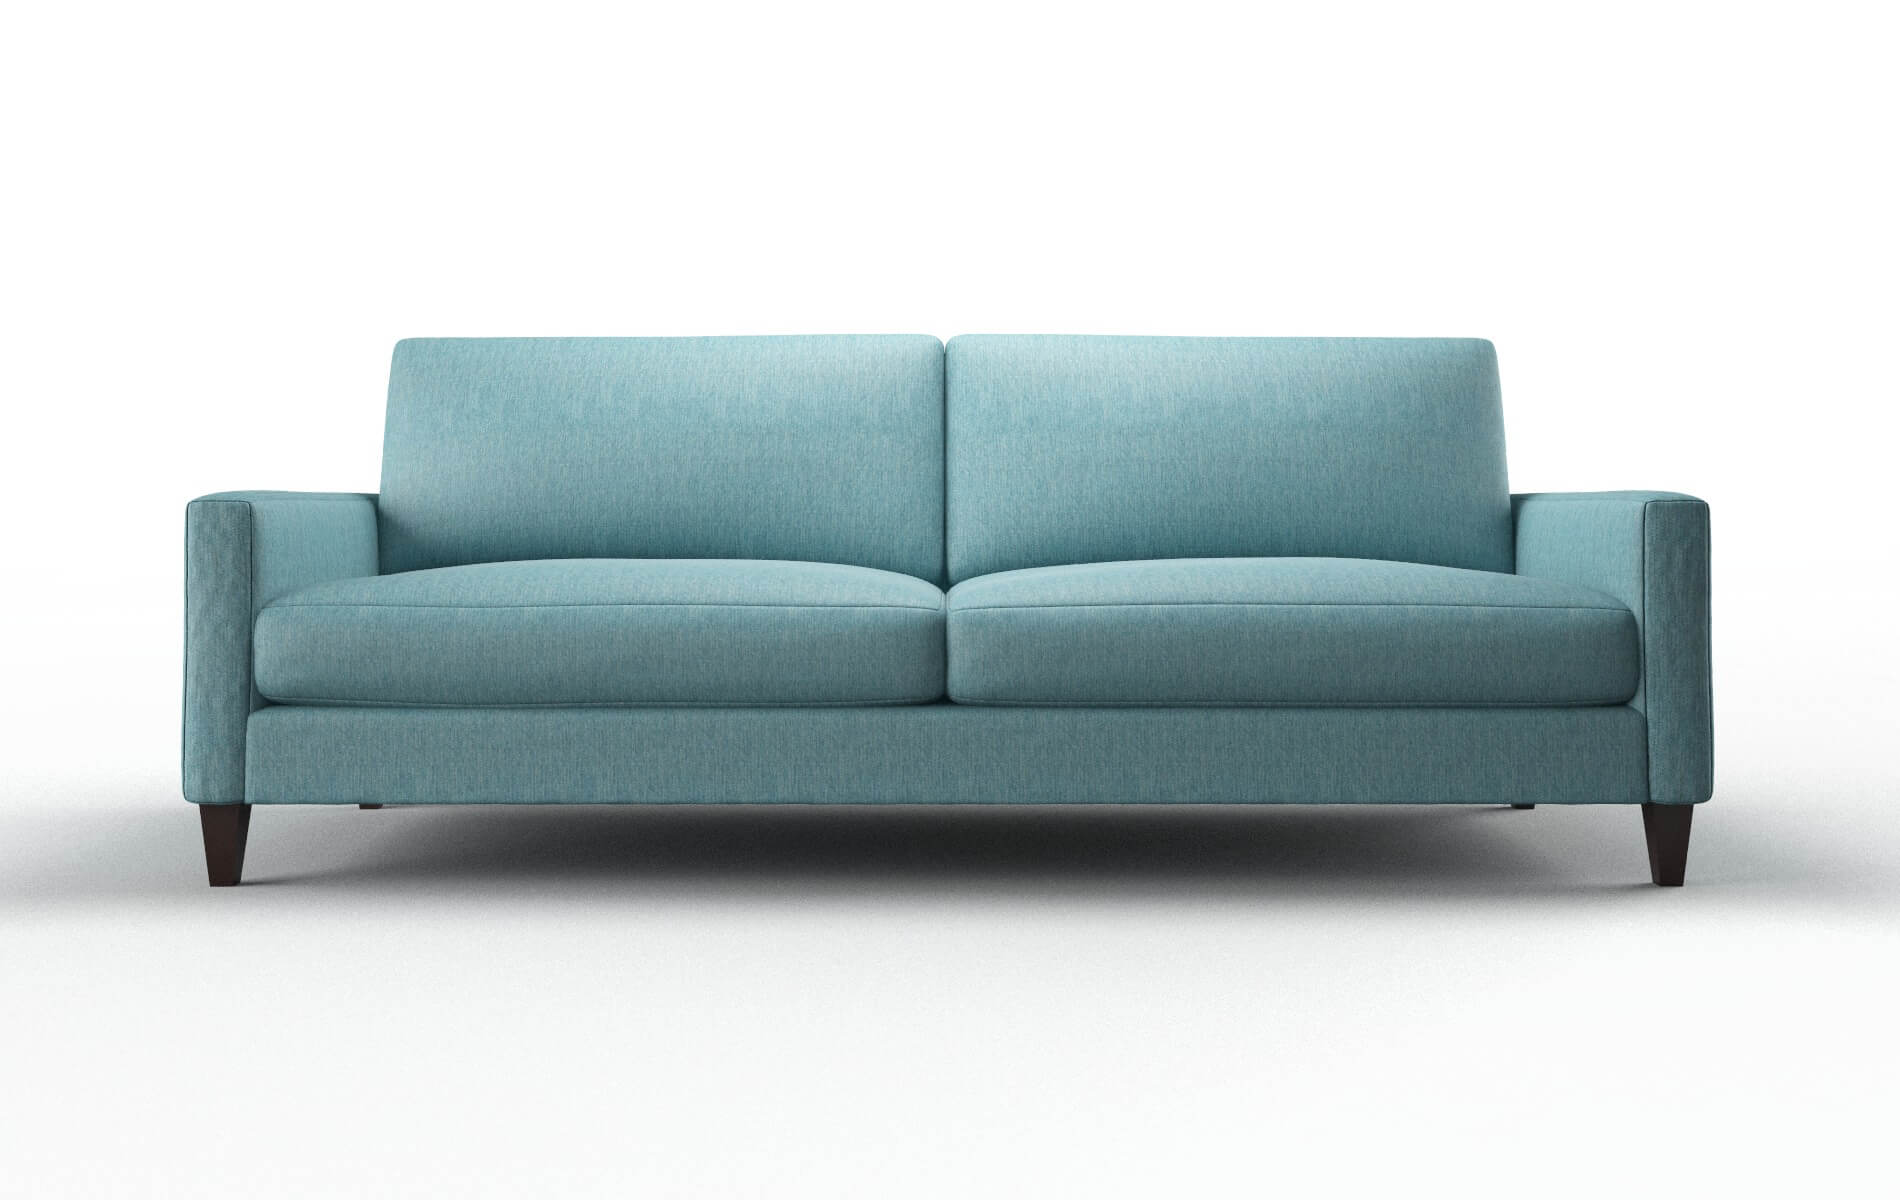 Cannes Cosmo Turquoise chair espresso legs